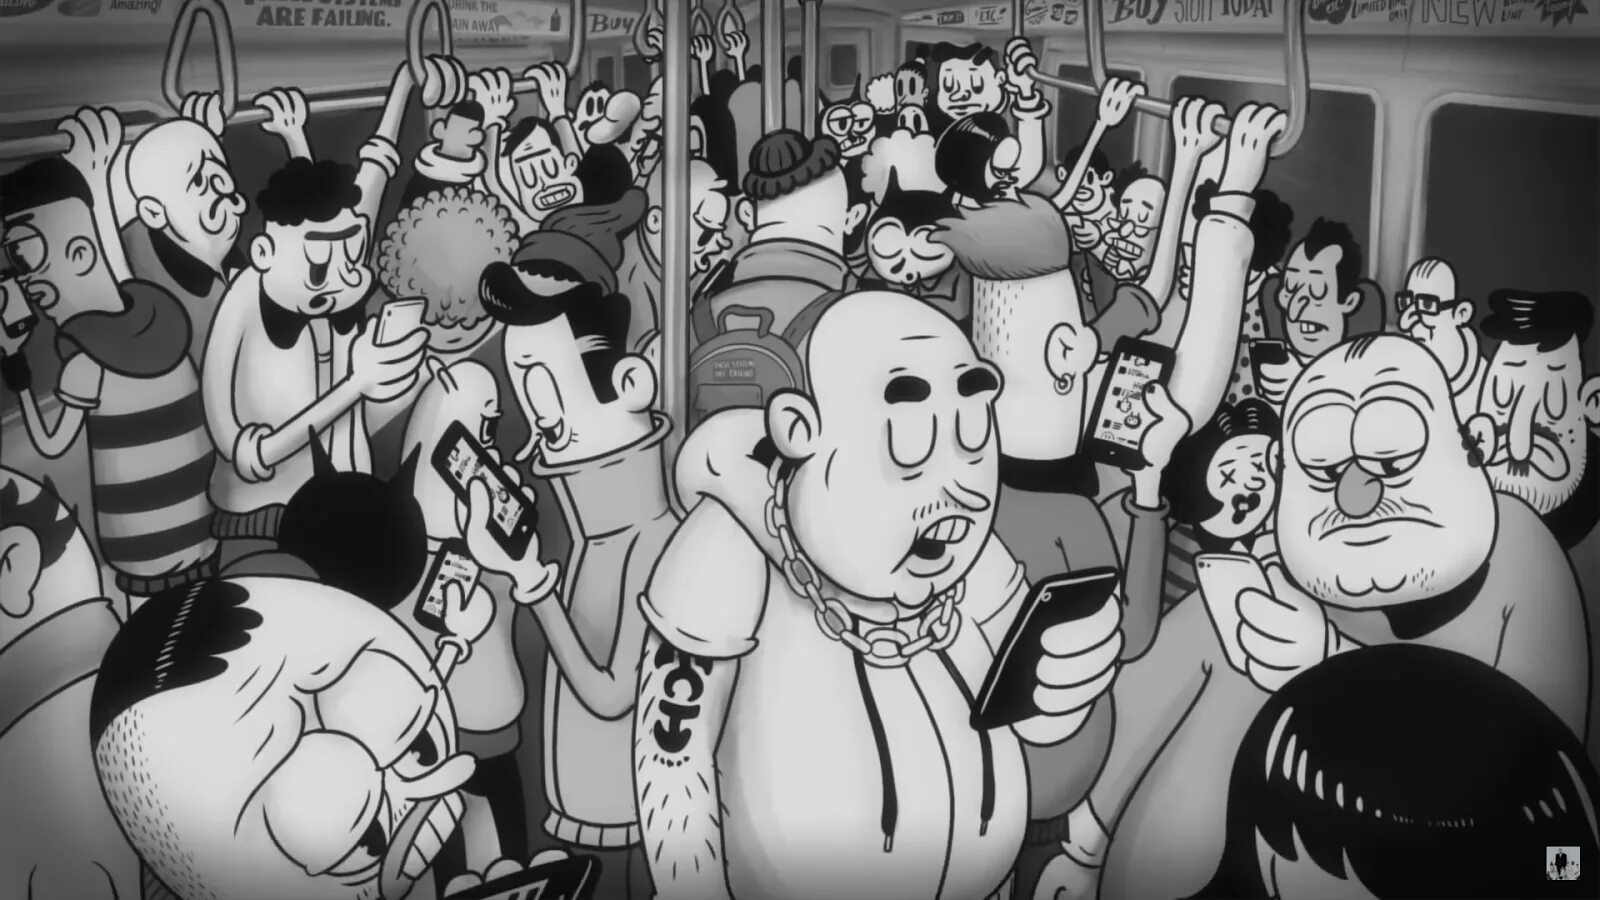 World like 5. Steve cutts Moby. Moby are you Lost.